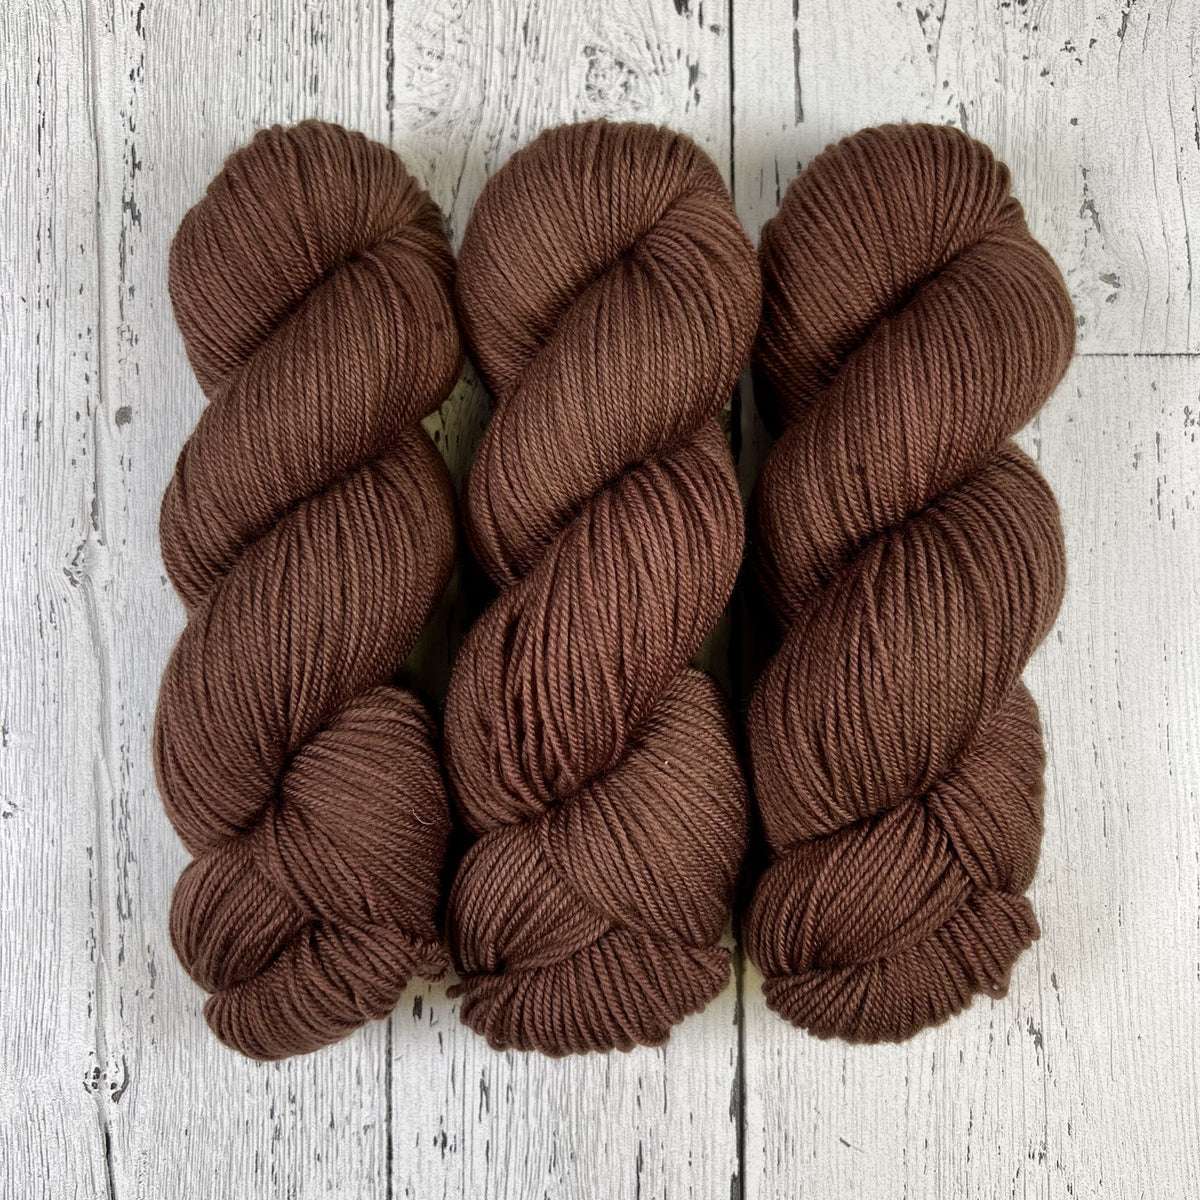 Chocolate Lab - Revival Worsted - Dyed Stock